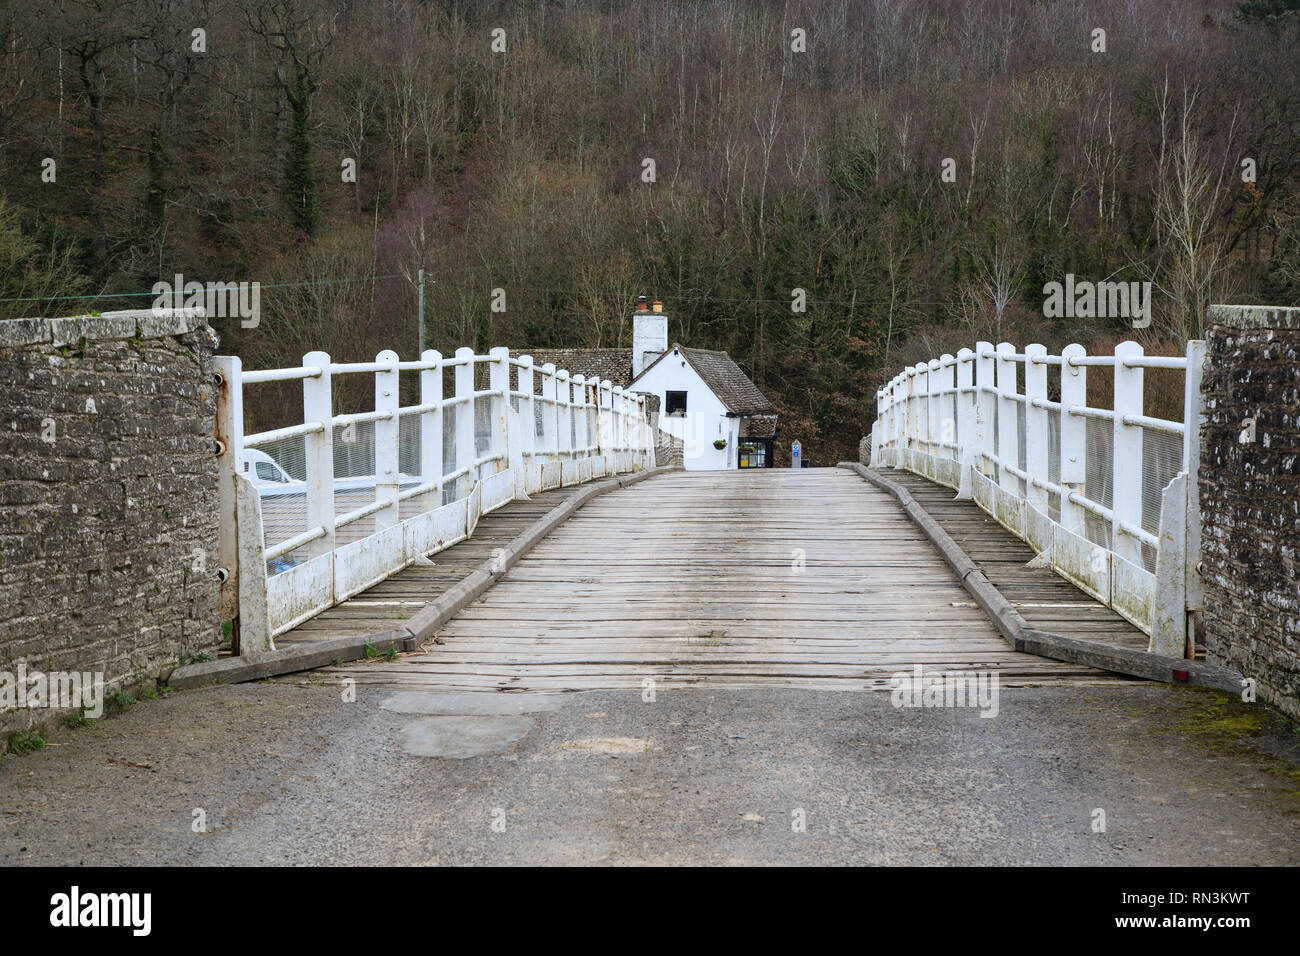 Whitney-on-Wye toll bridge, crossing the River Wye and linking Herefordshire, England and Powys, Wales. Stock Photo